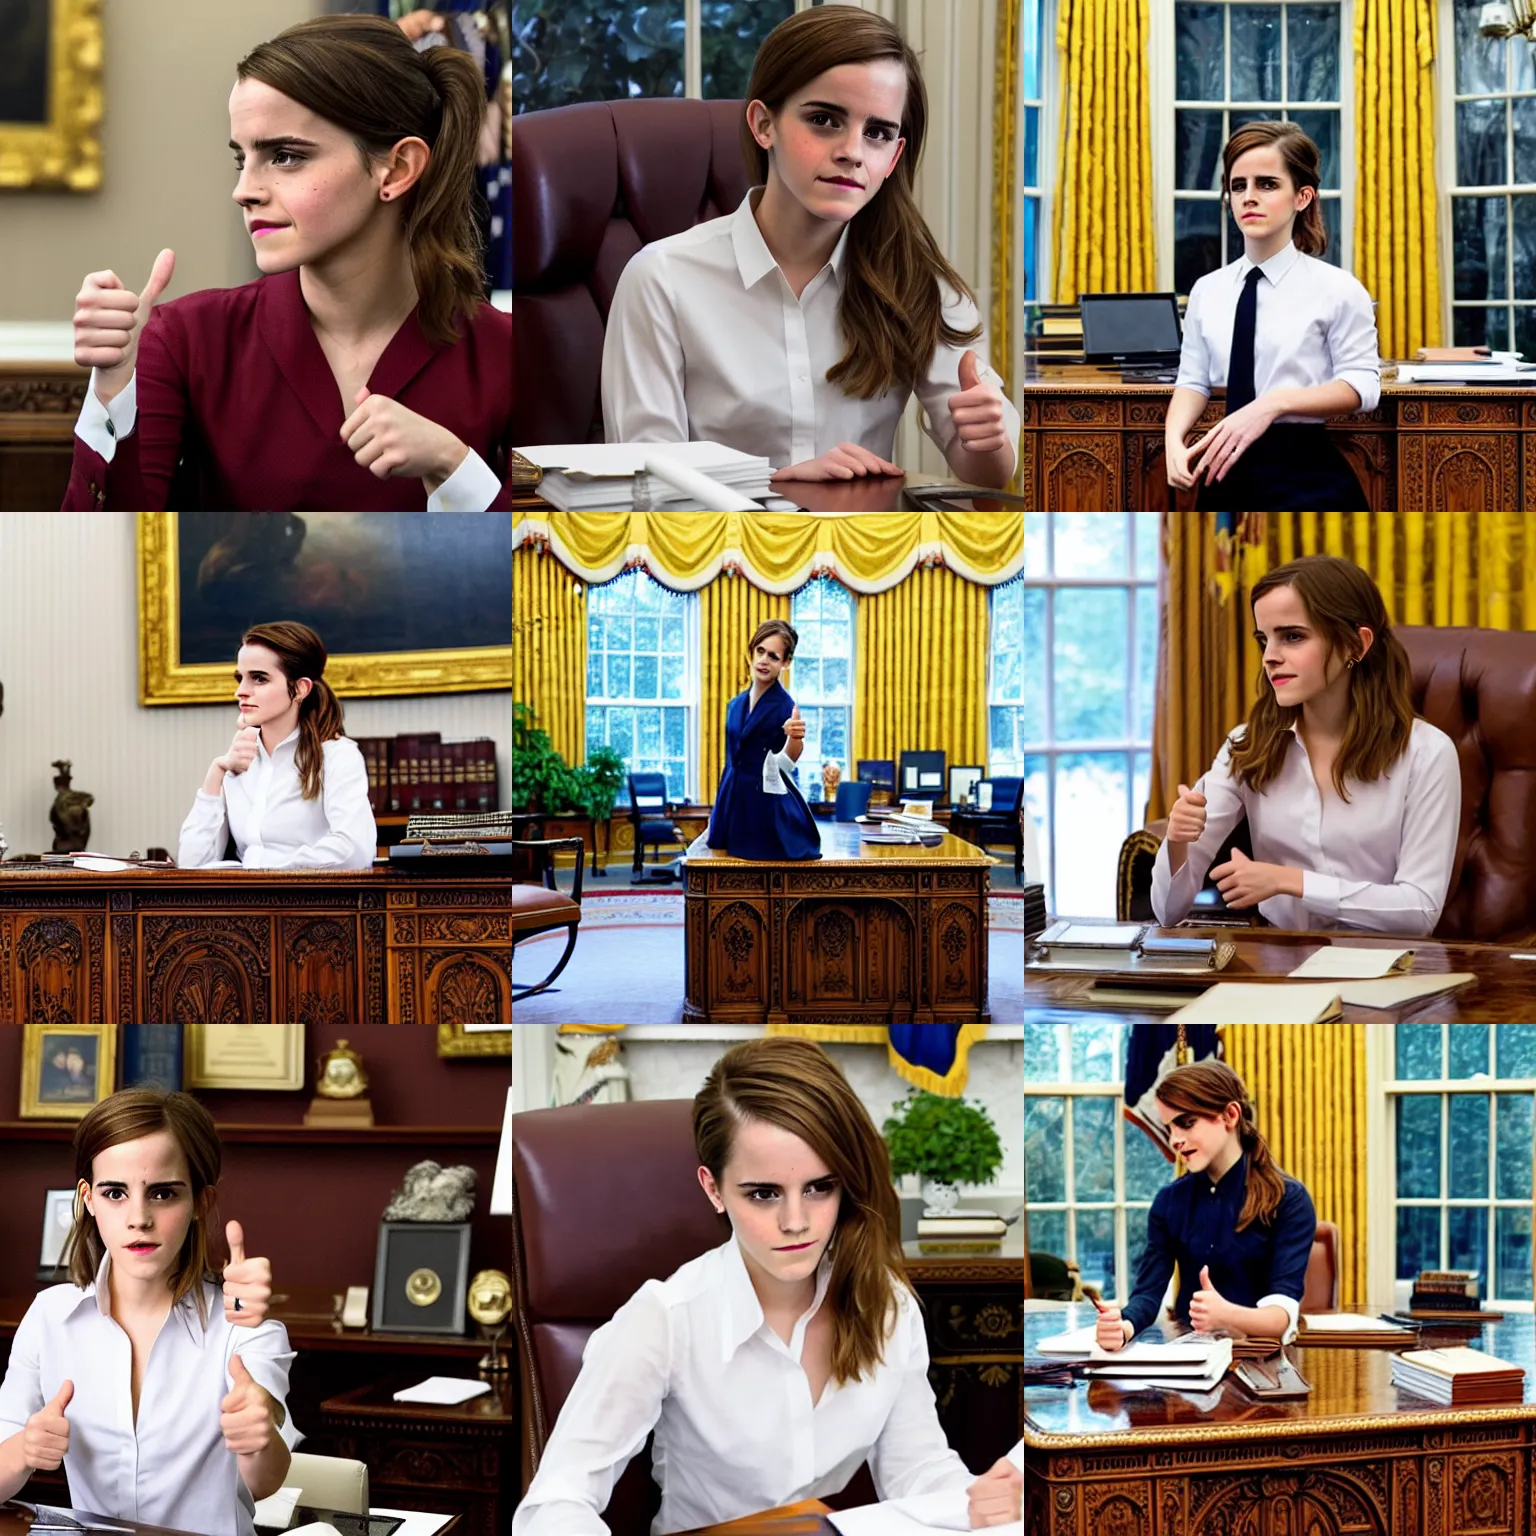 Prompt: emma watson wearing a dress shirt, giving thumbs up at her desk in the oval office